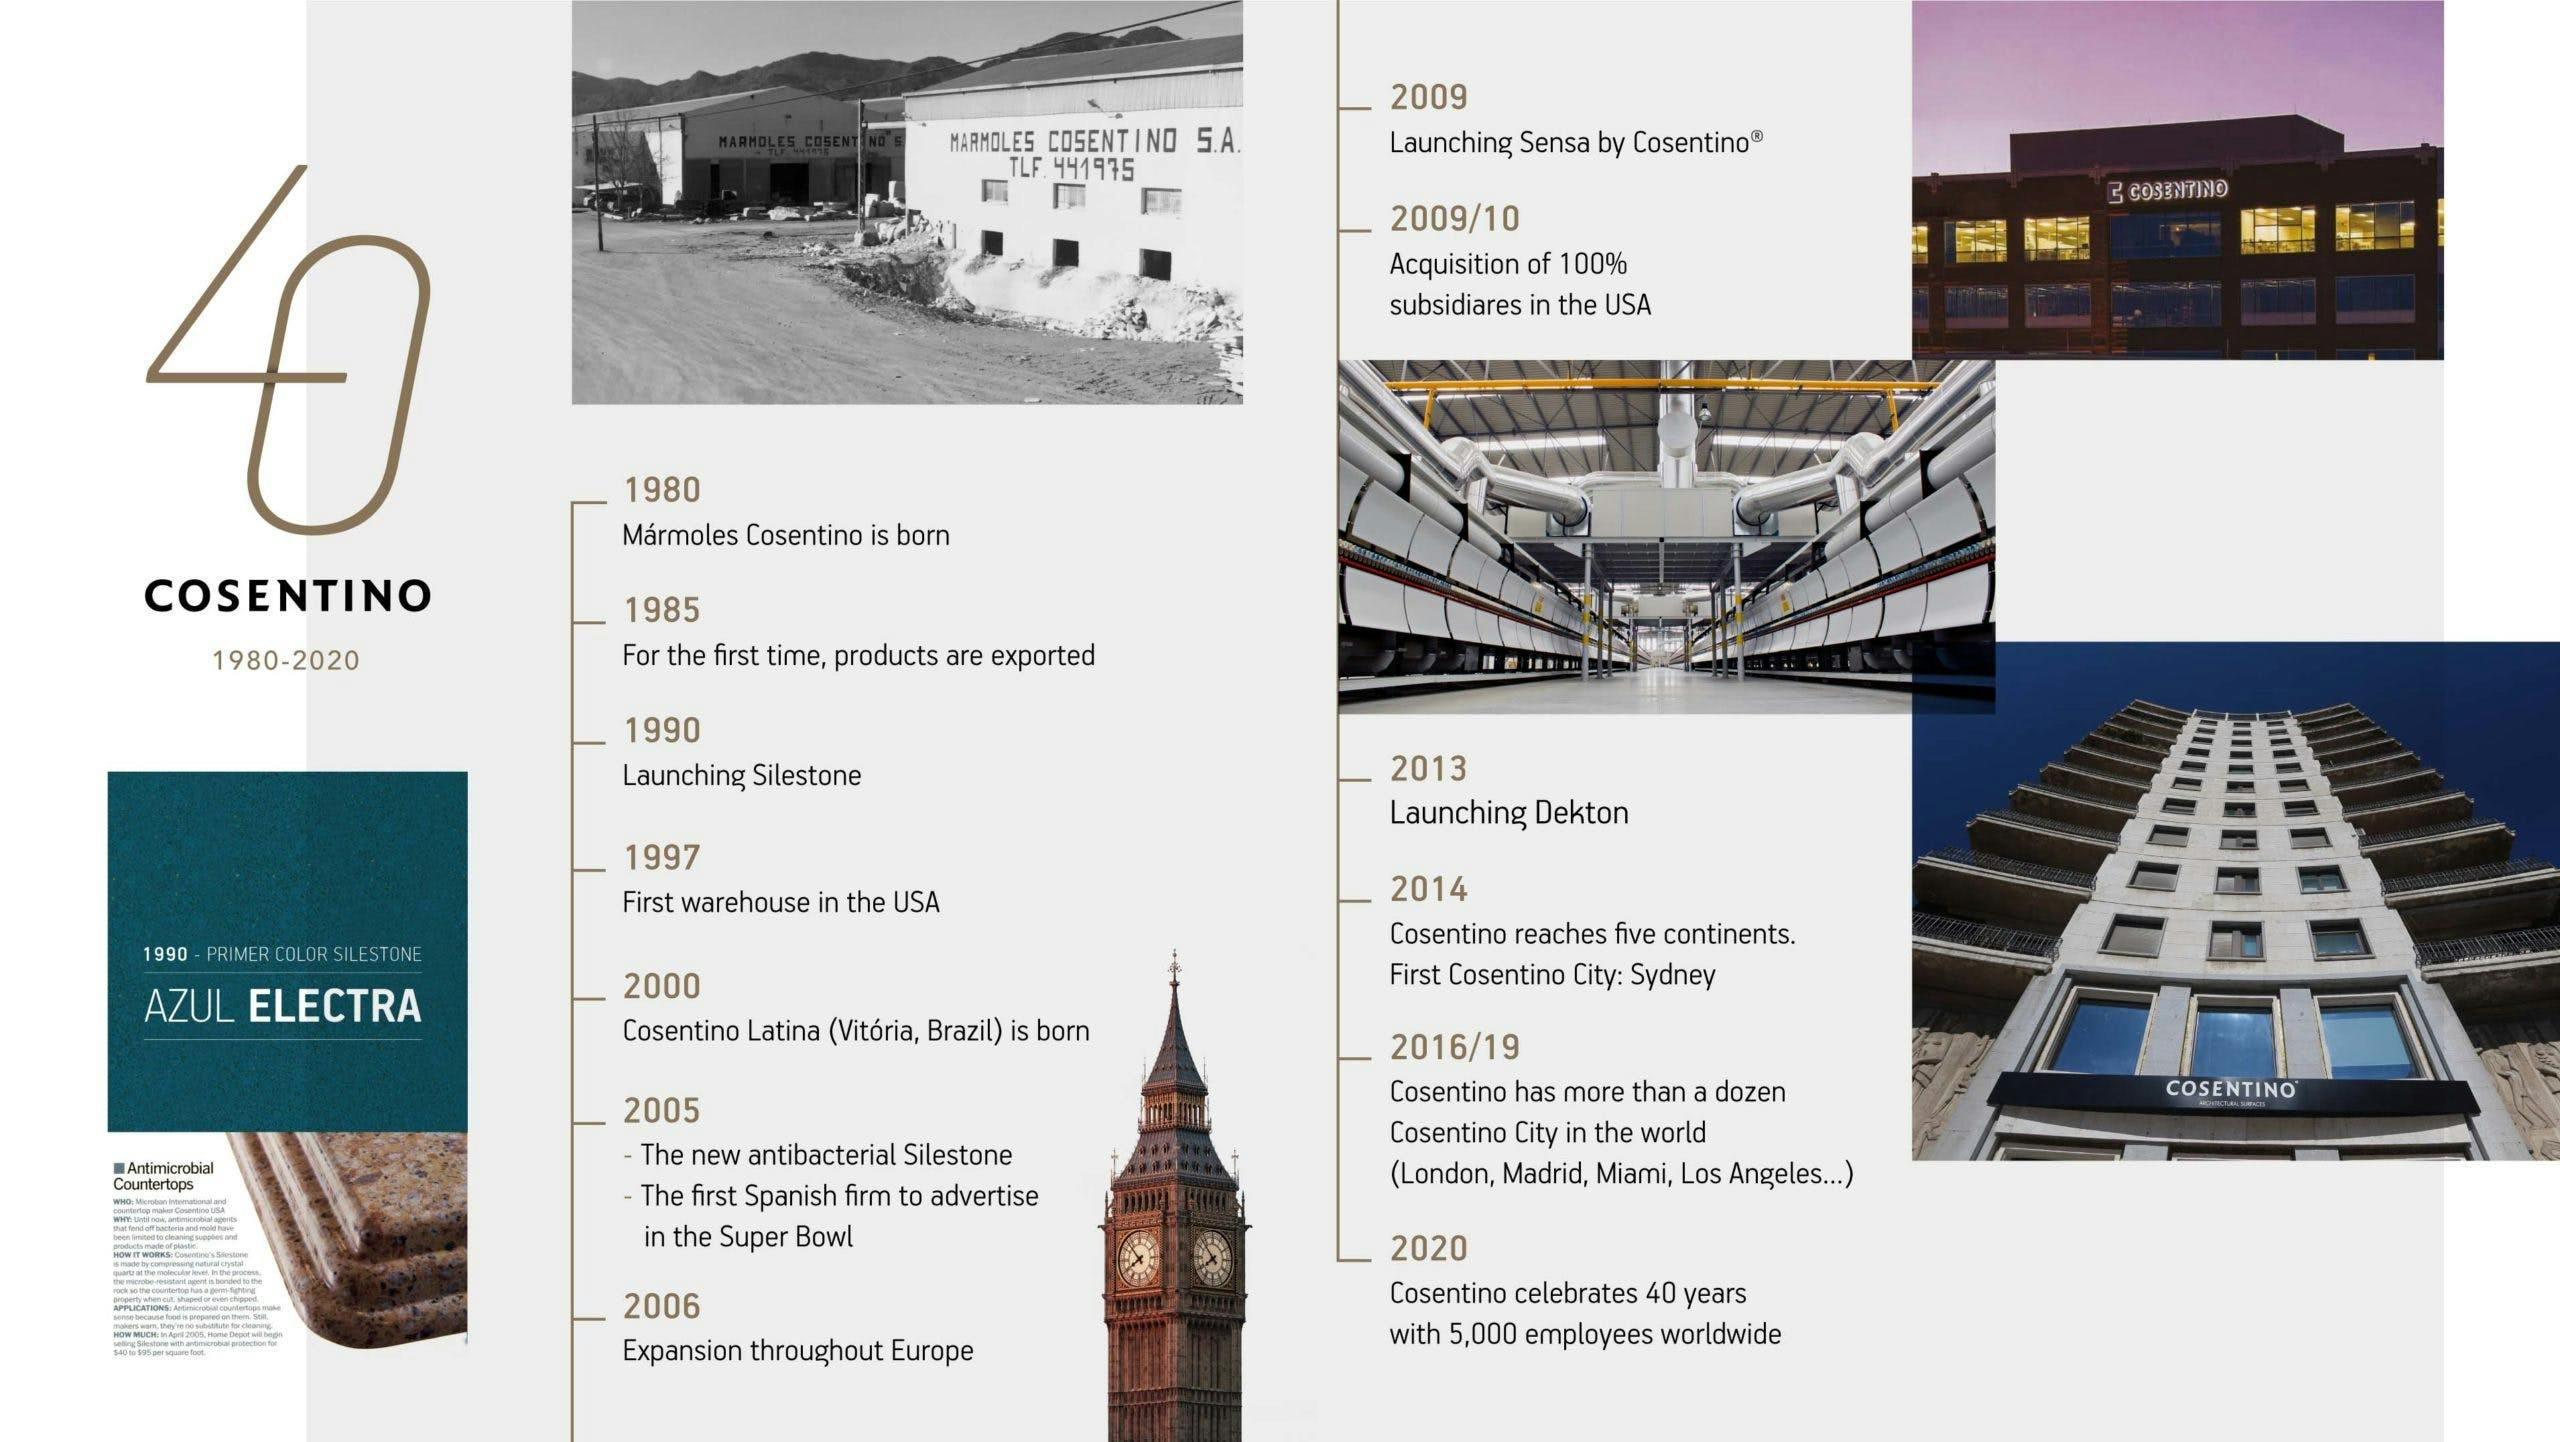 Image 32 of Timeline Cosentino 40 anniversary ENG scaled 1 in Cosentino, 40 years of international growth and expansion - Cosentino